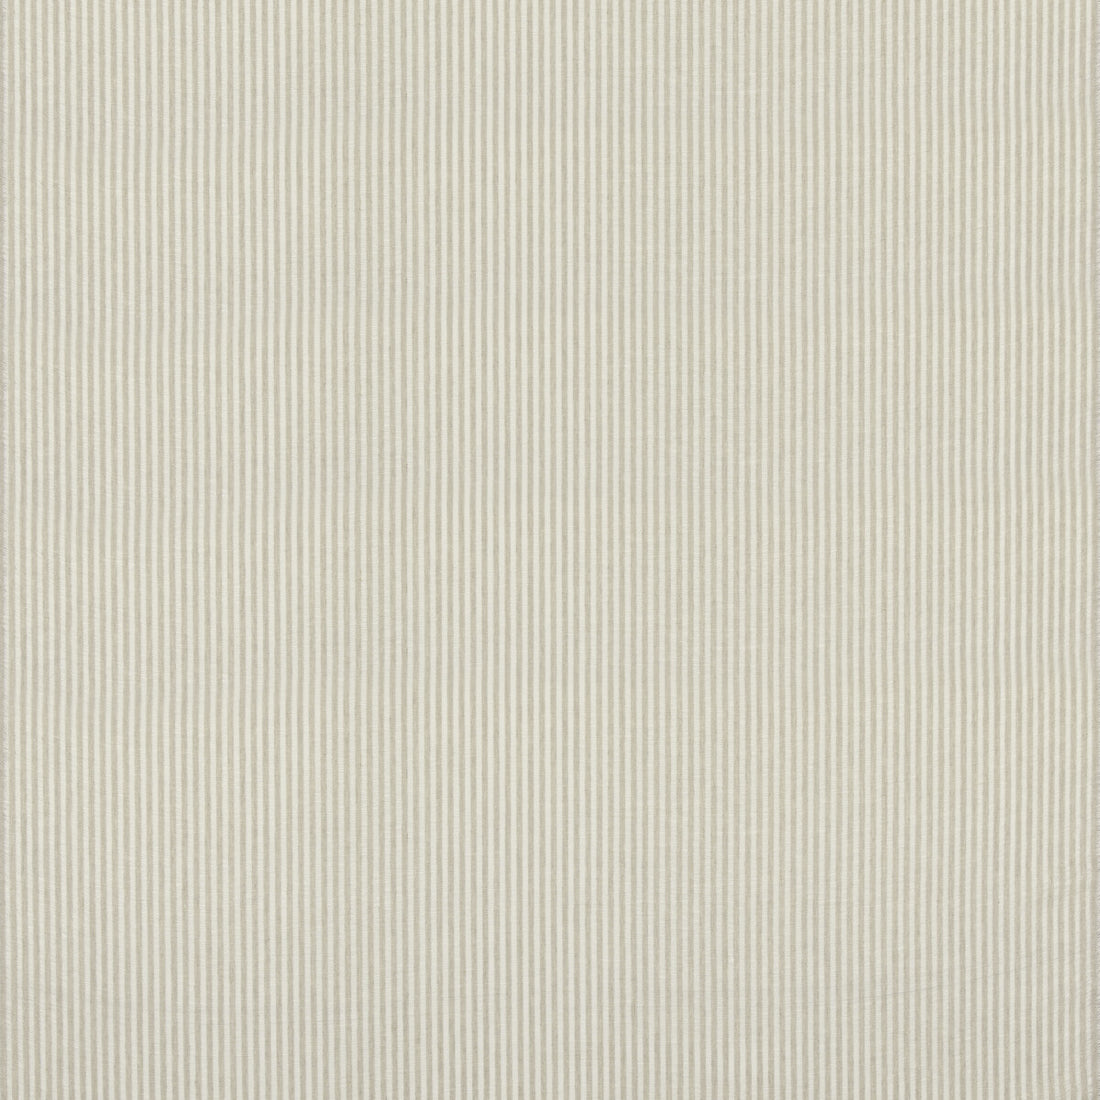 Cirrus fabric in parchment color - pattern ED85409.225.0 - by Threads in the Quintessential Naturals collection